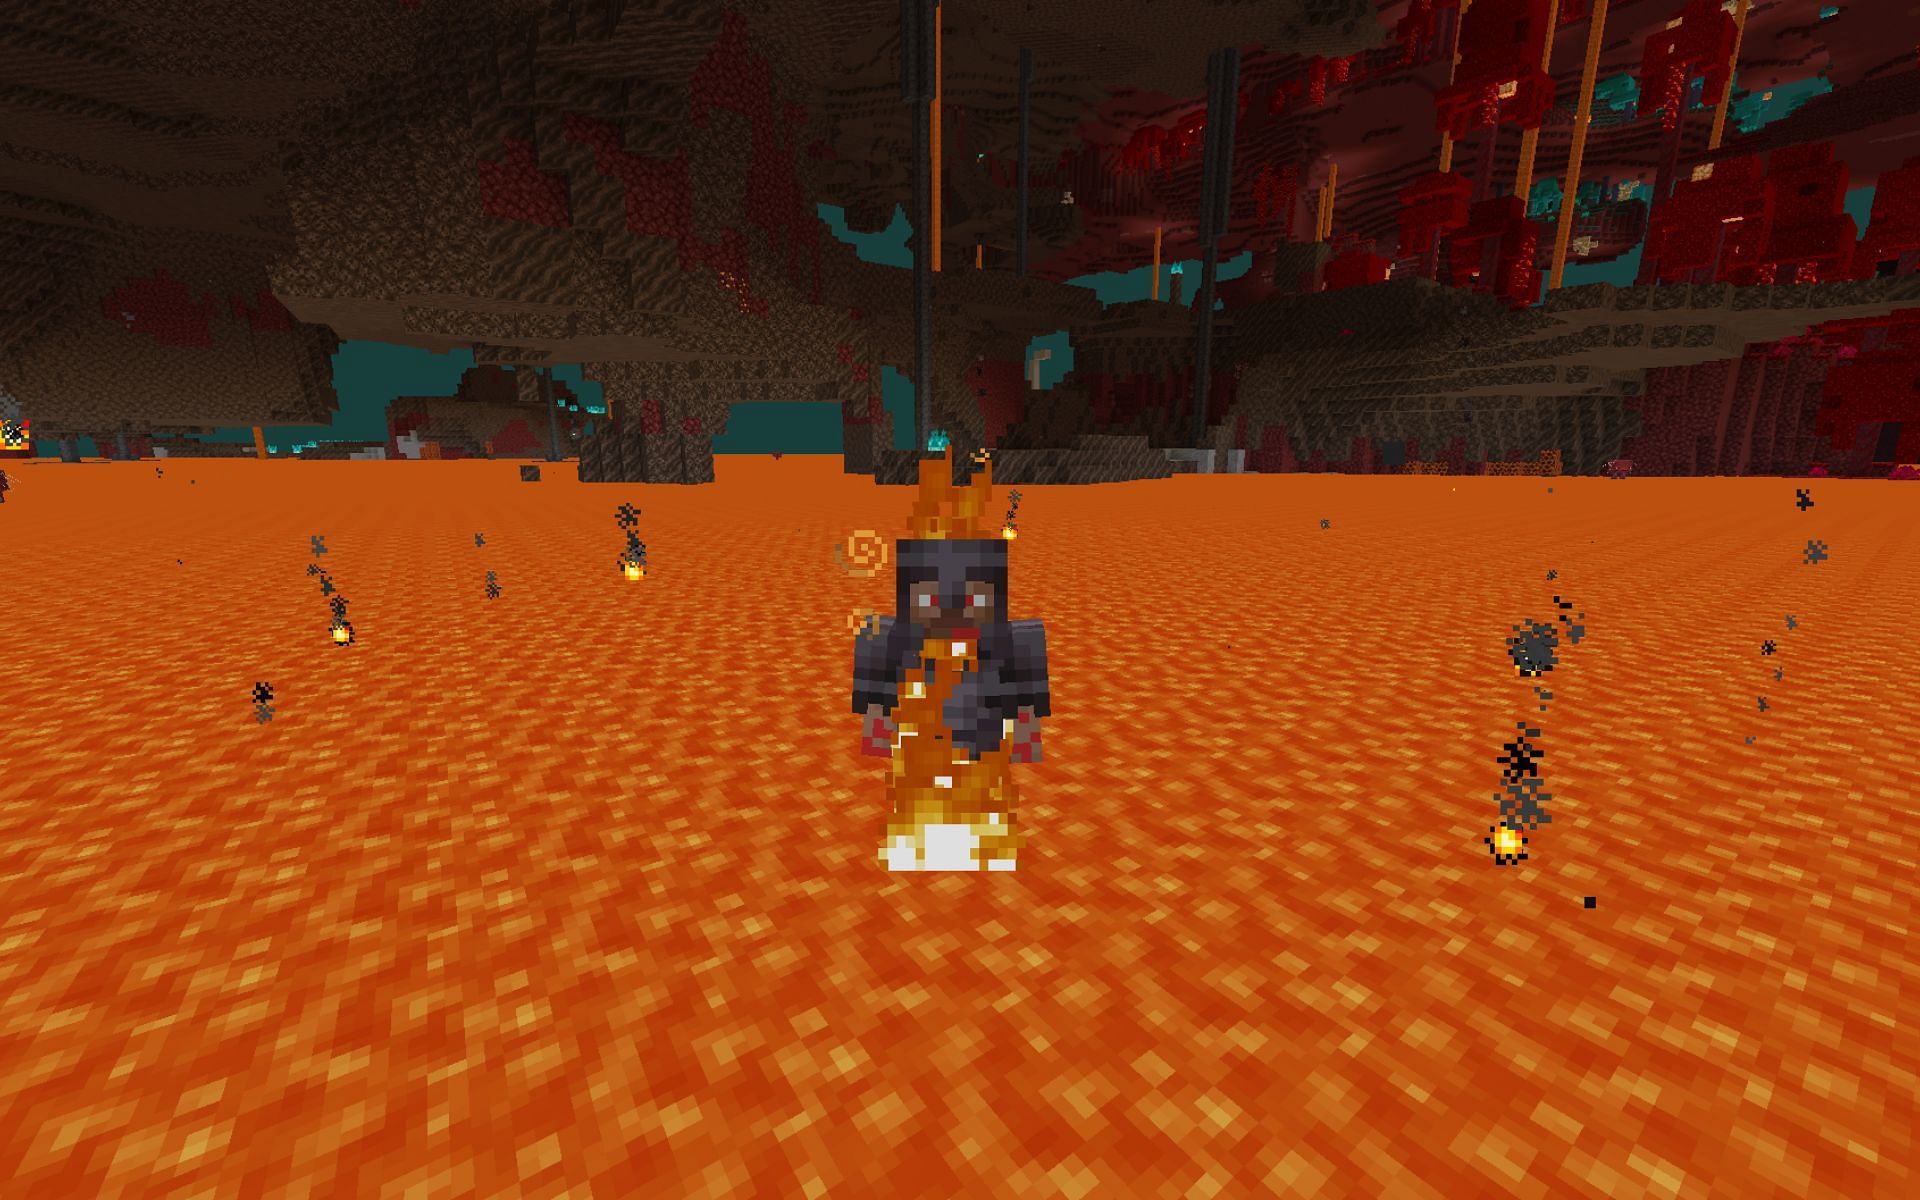 Fire resistance potion can be a lifesaver in Minecraft&#039;s Nether realm (Image via Mojang)